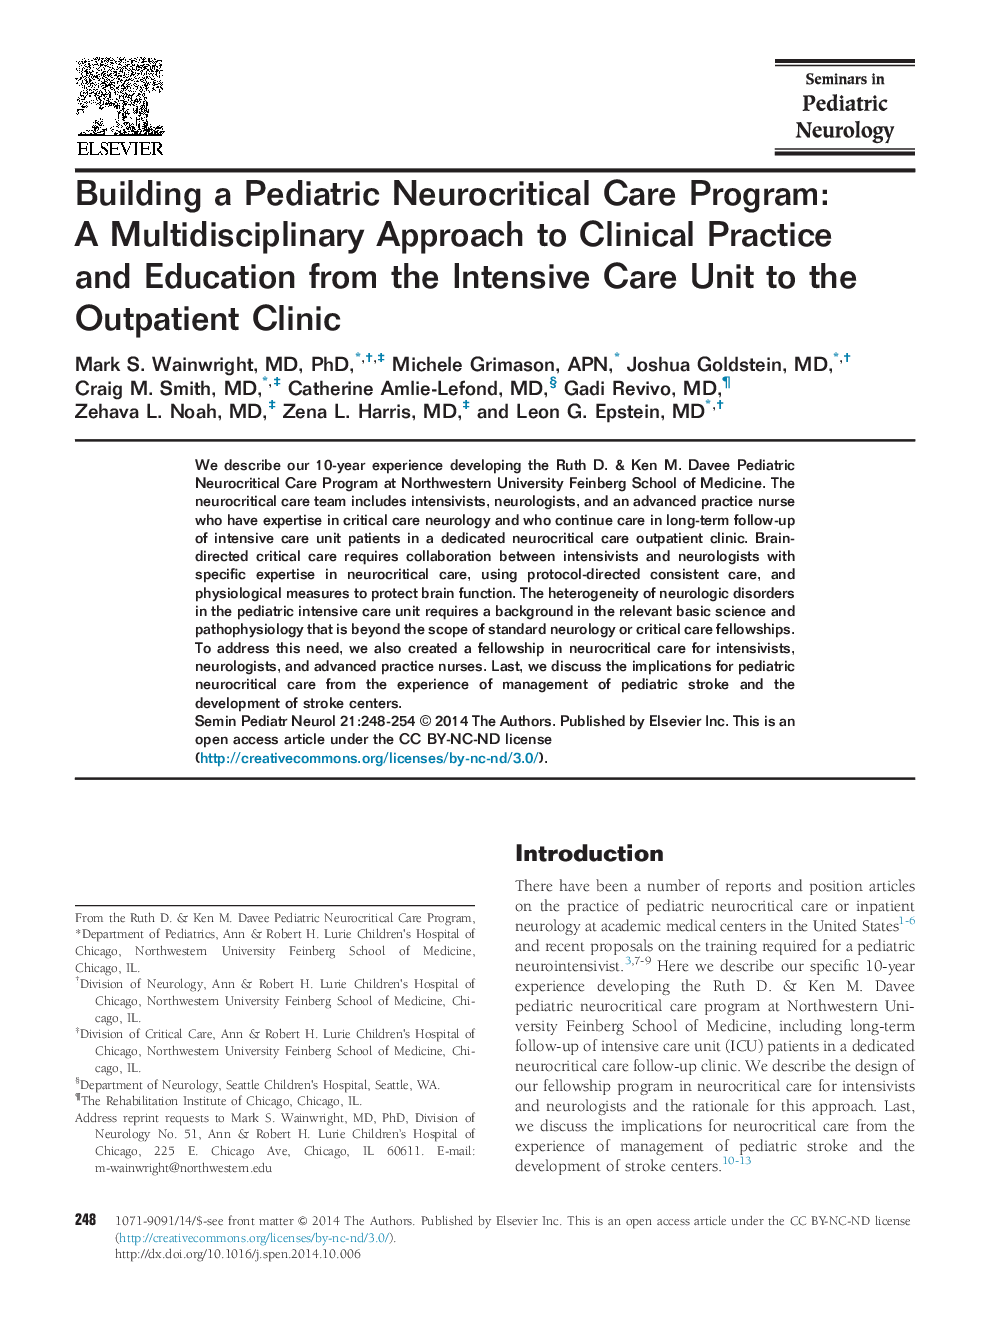 Building a Pediatric Neurocritical Care Program: A Multidisciplinary Approach to Clinical Practice and Education from the Intensive Care Unit to the Outpatient Clinic